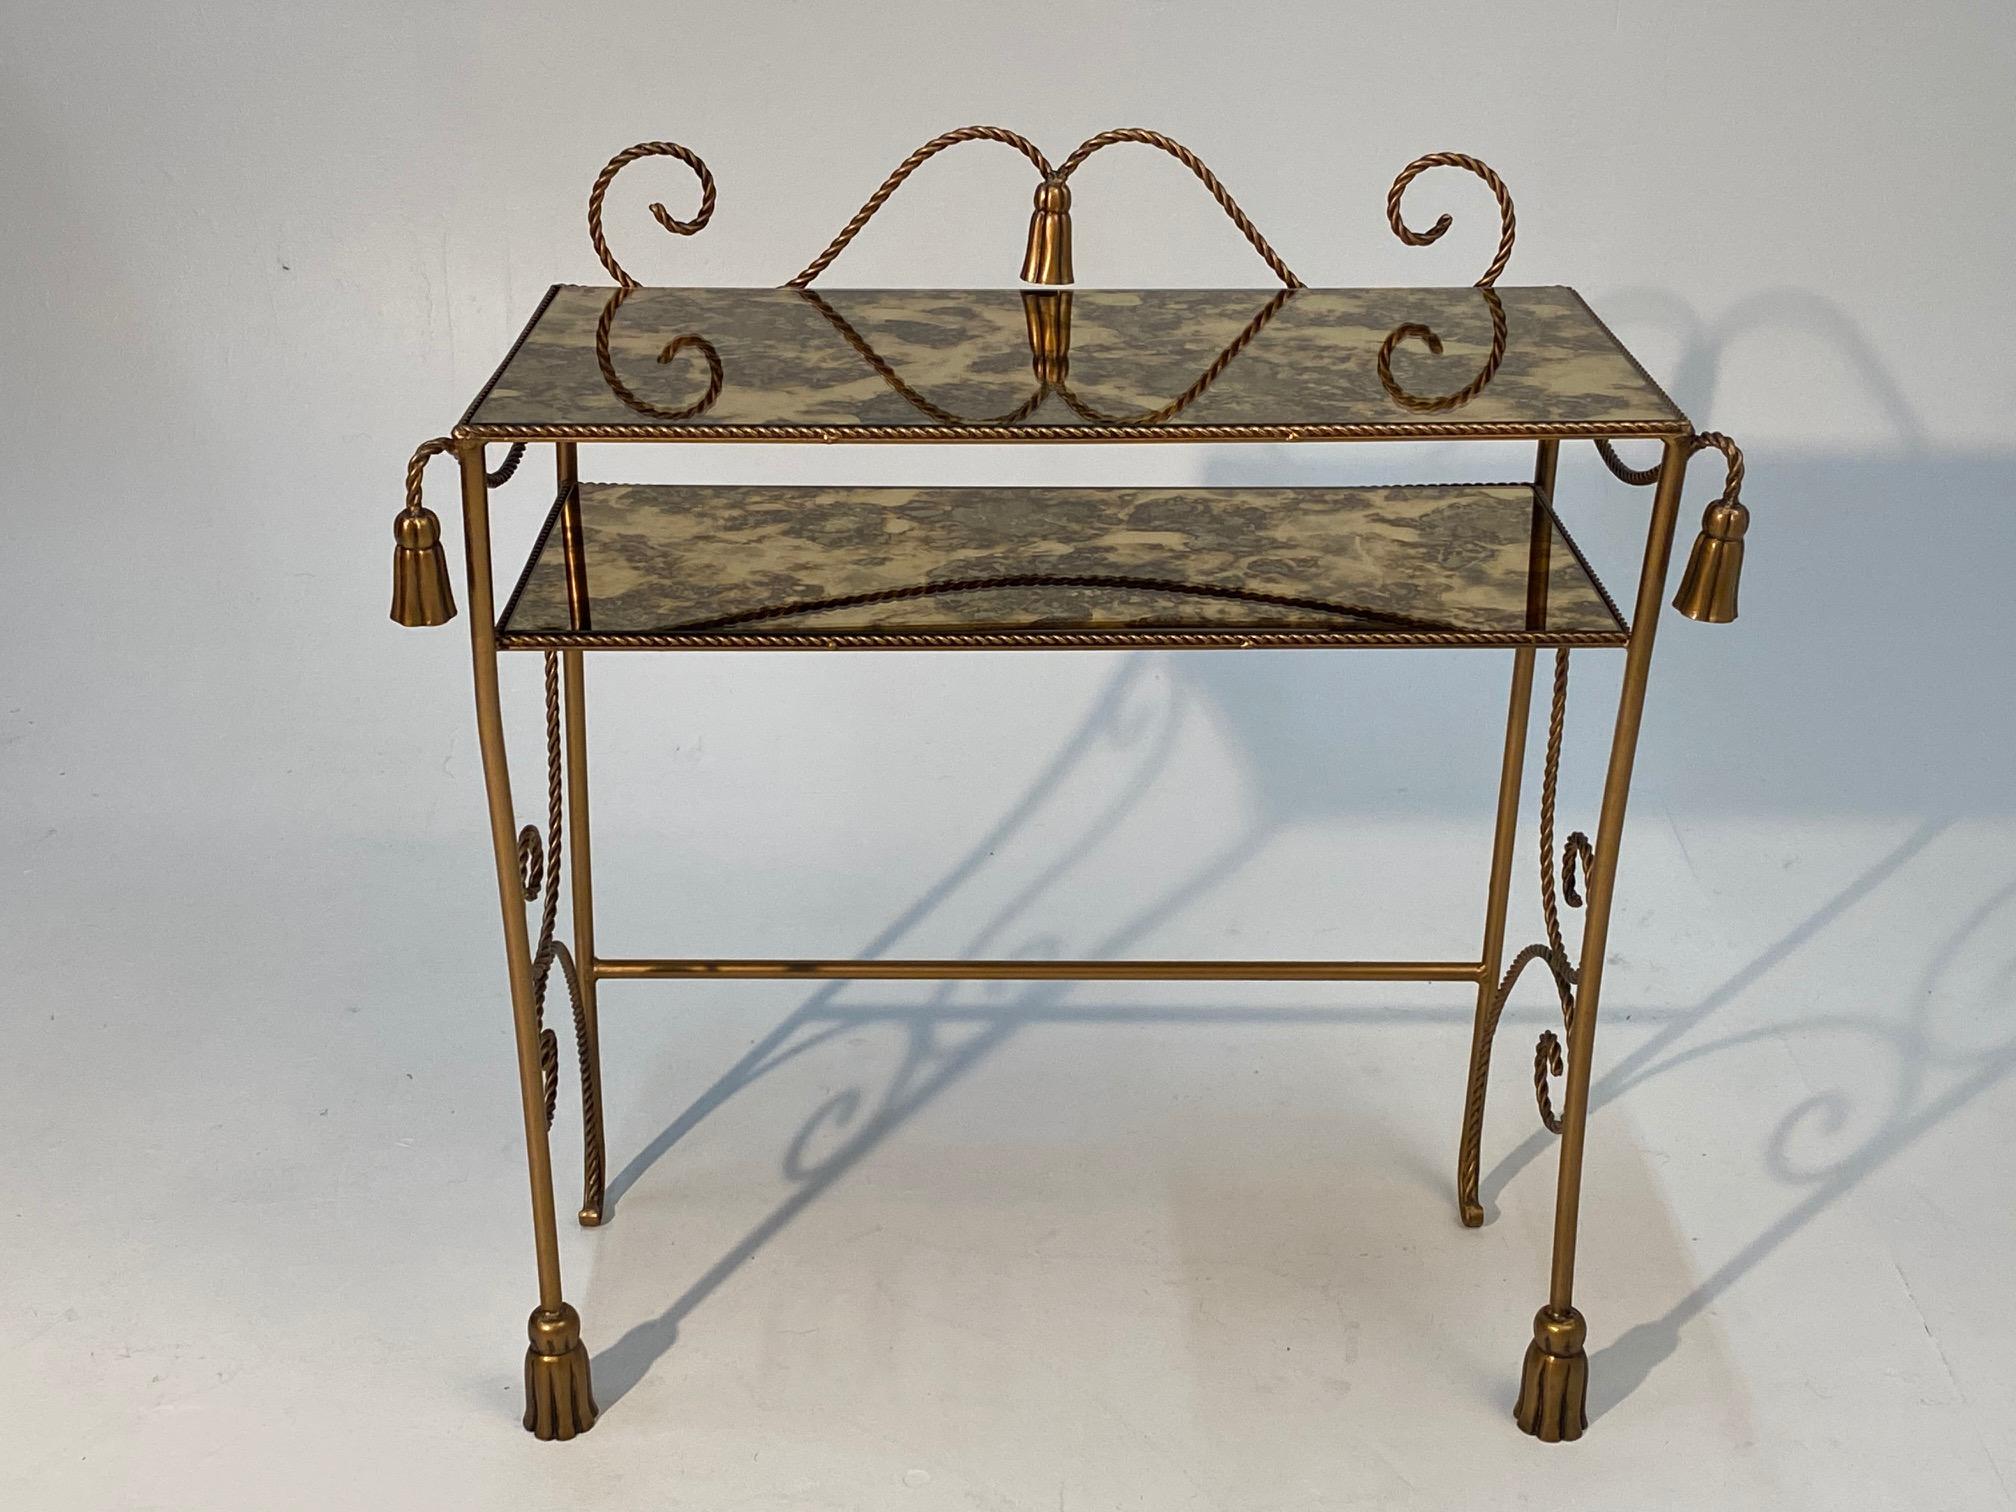 Elegant Italian Giltmetal Two-Tier Console Bar with Tassels For Sale 1